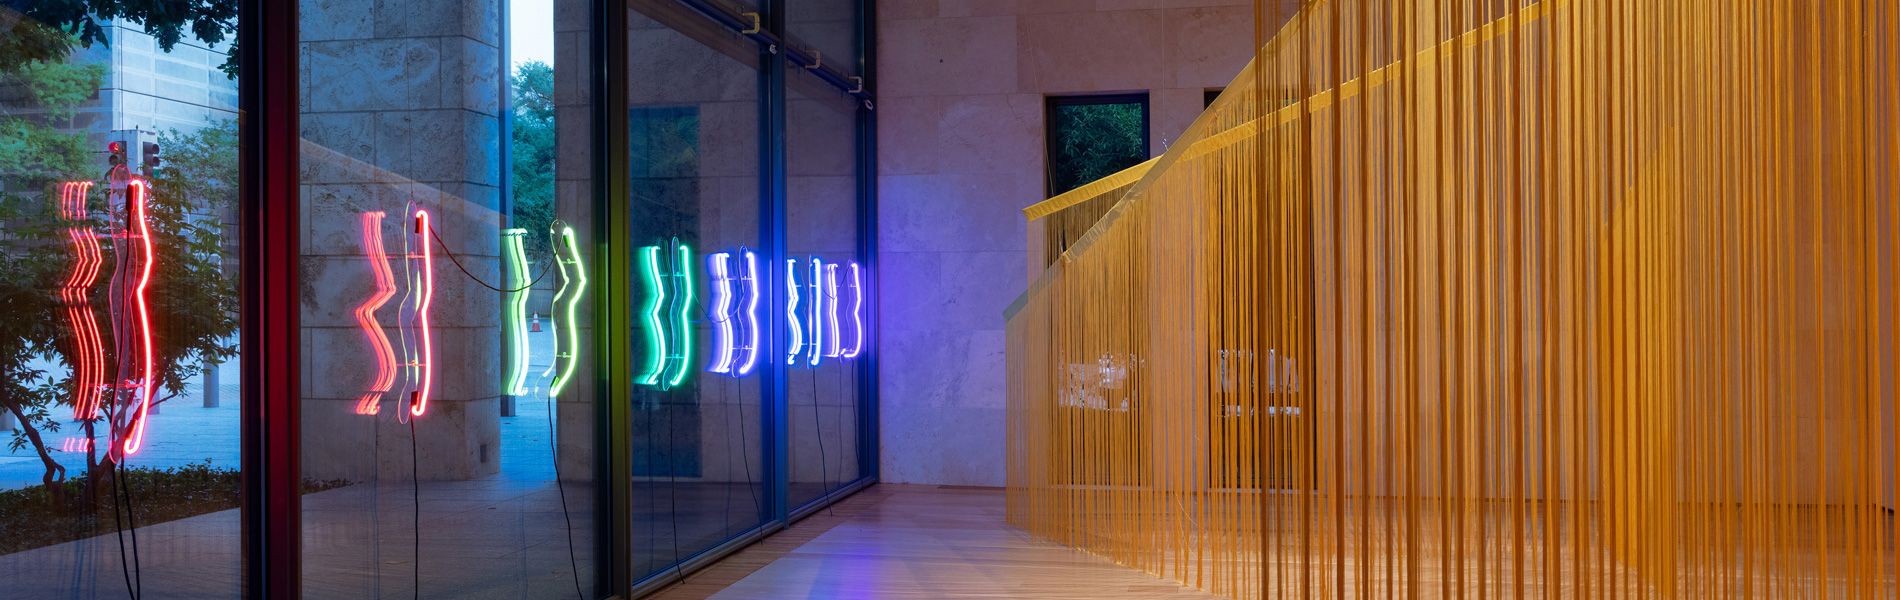 View from inside of the Nasher Gallery looking at the neon sculptures and a large fringed installation